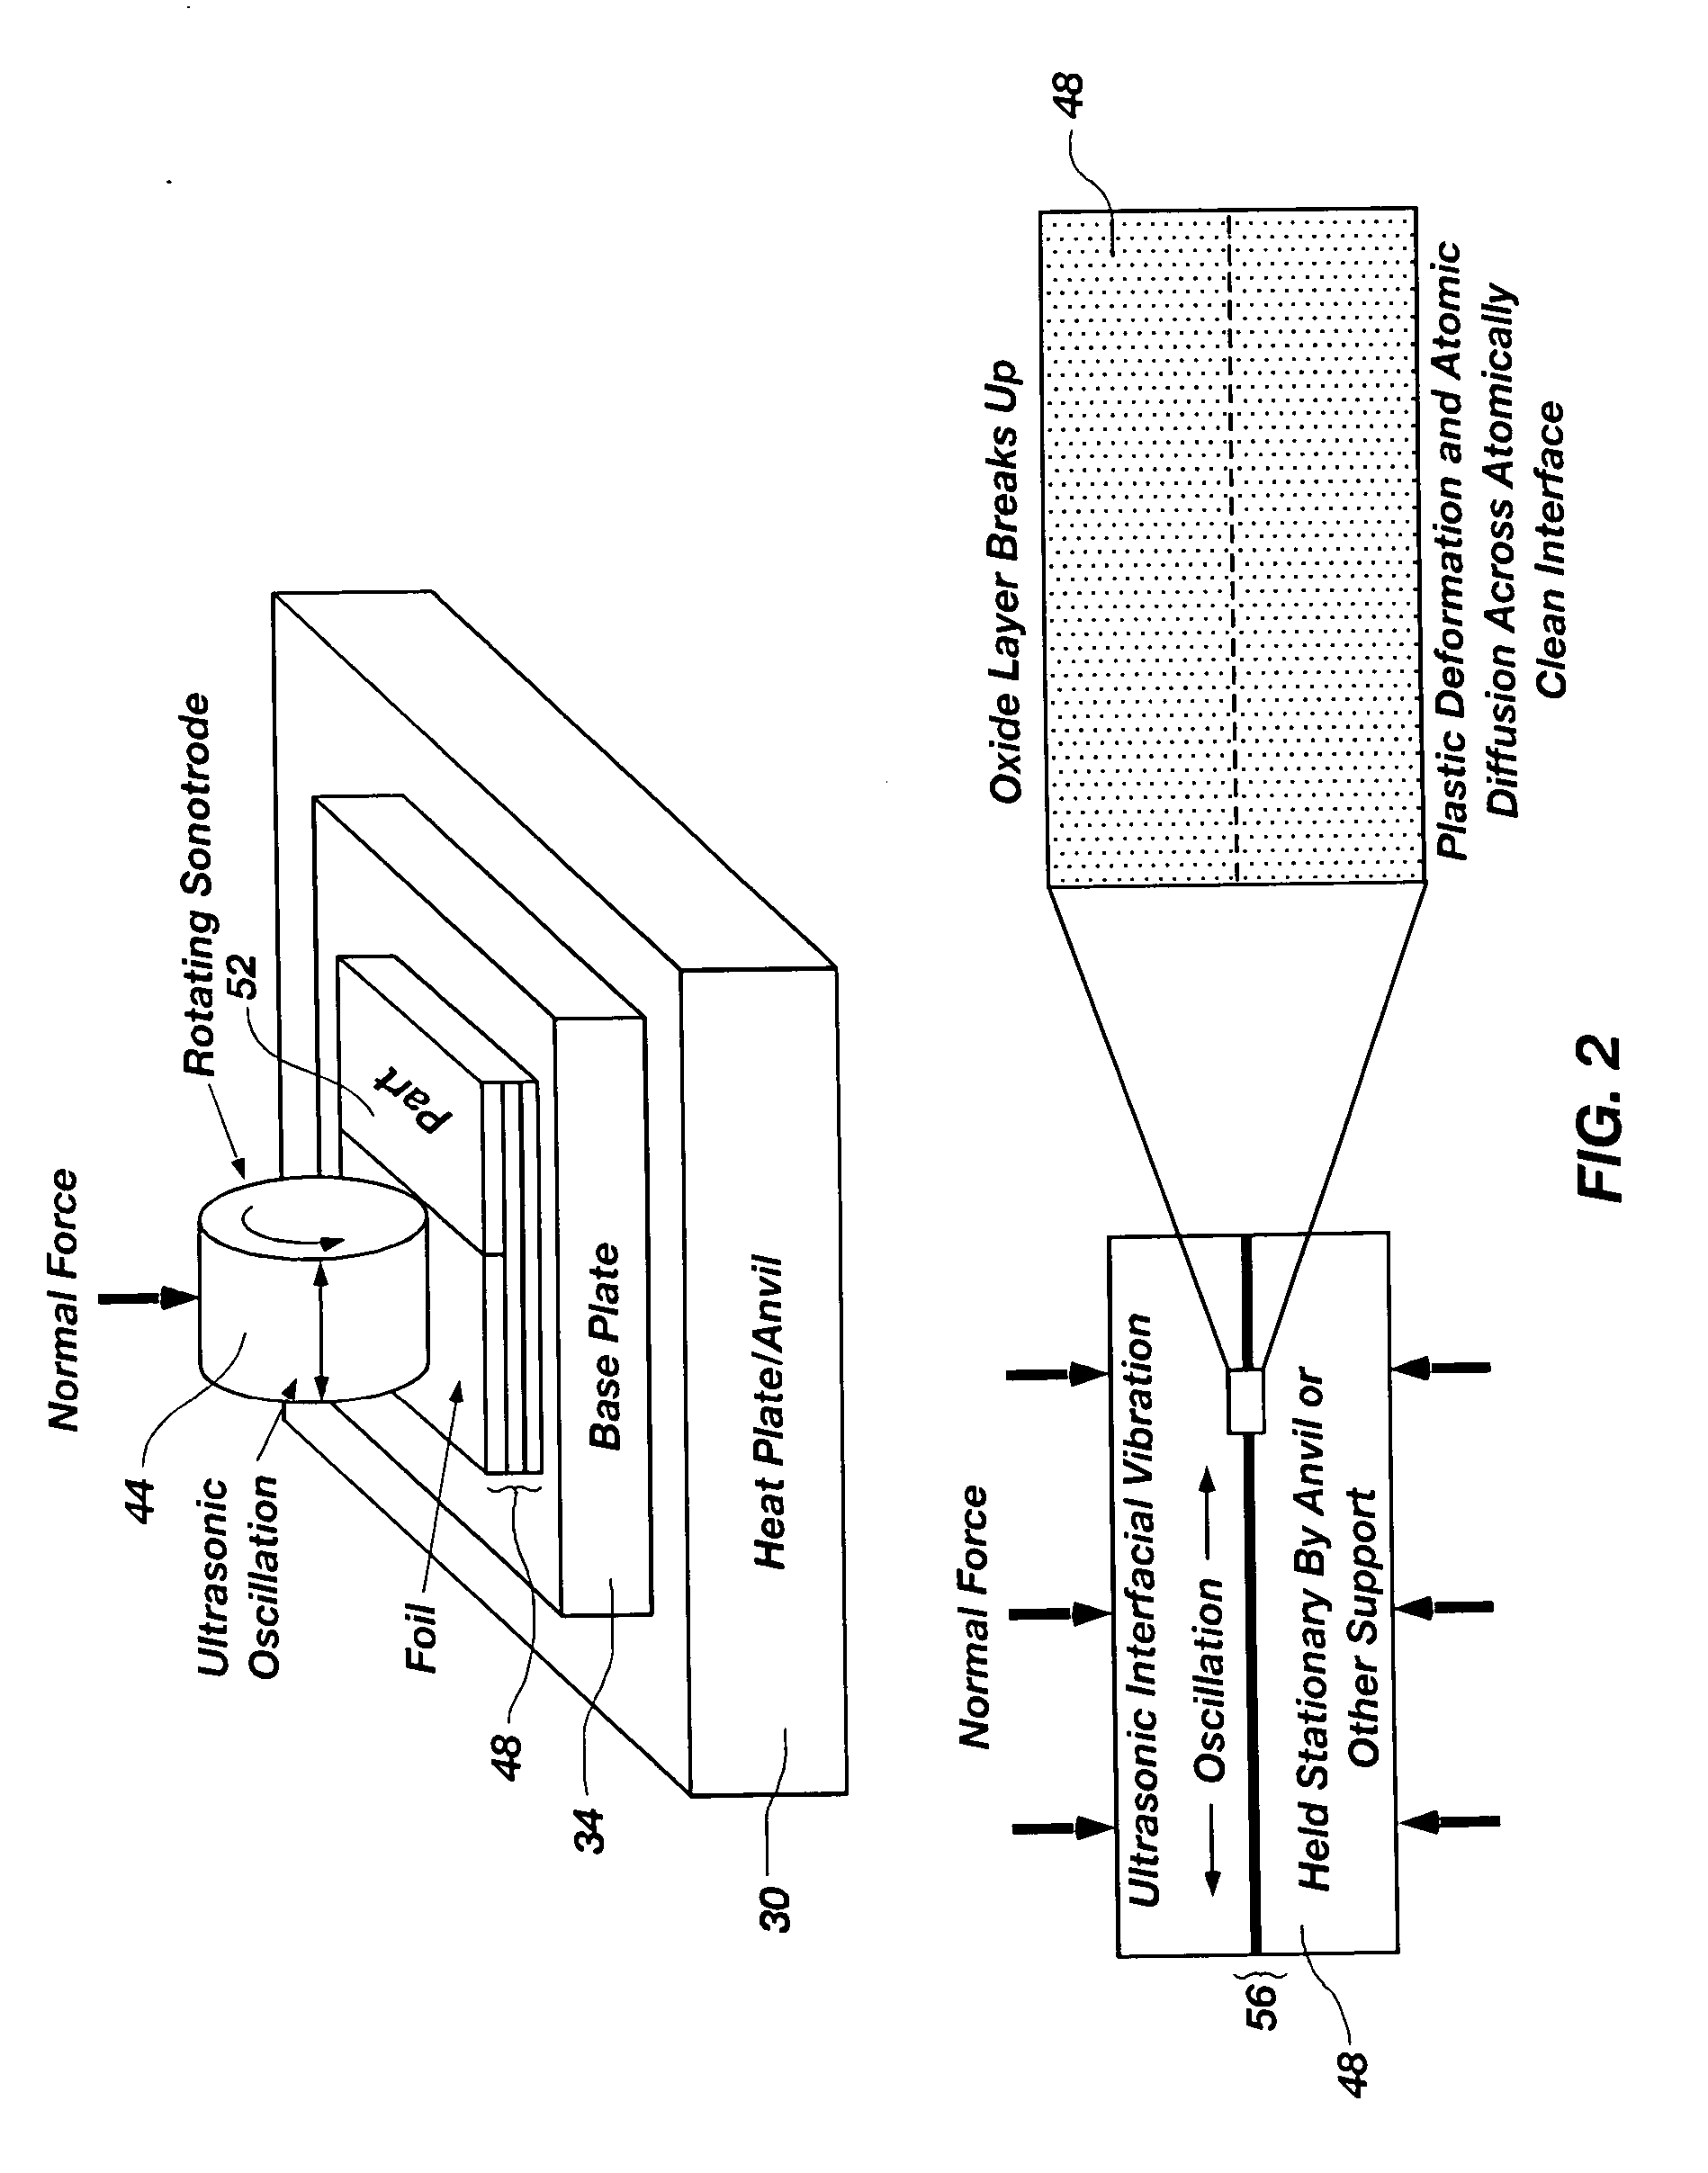 Method for creating highly integrated satellite systems